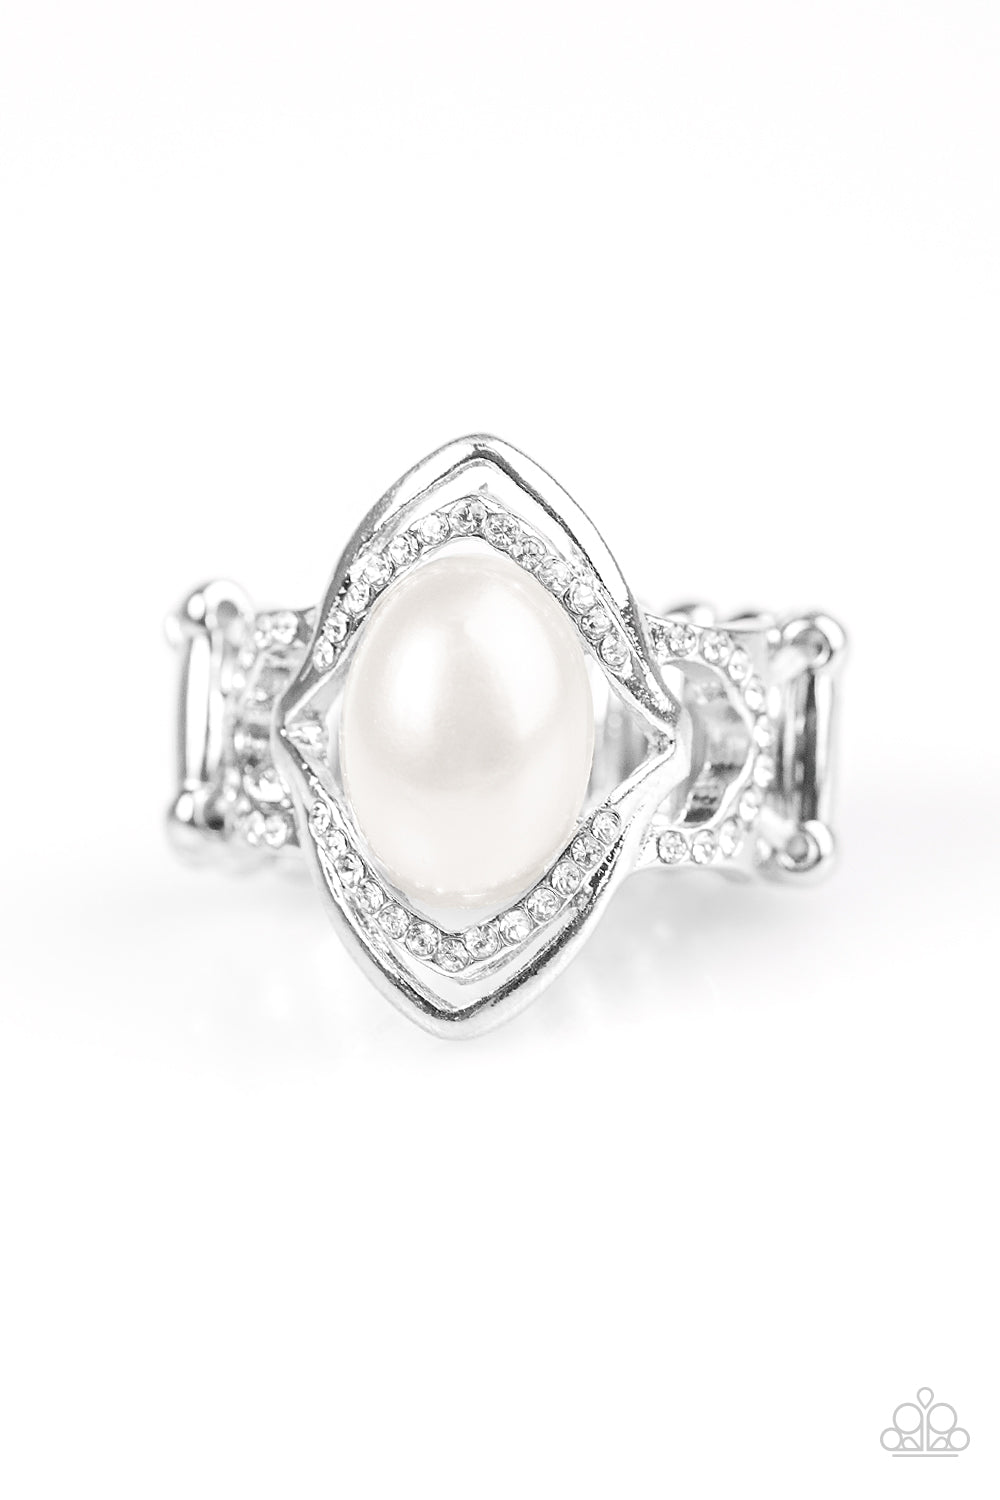 Paparazzi Crown Coronation White Gem and Pearl Ring